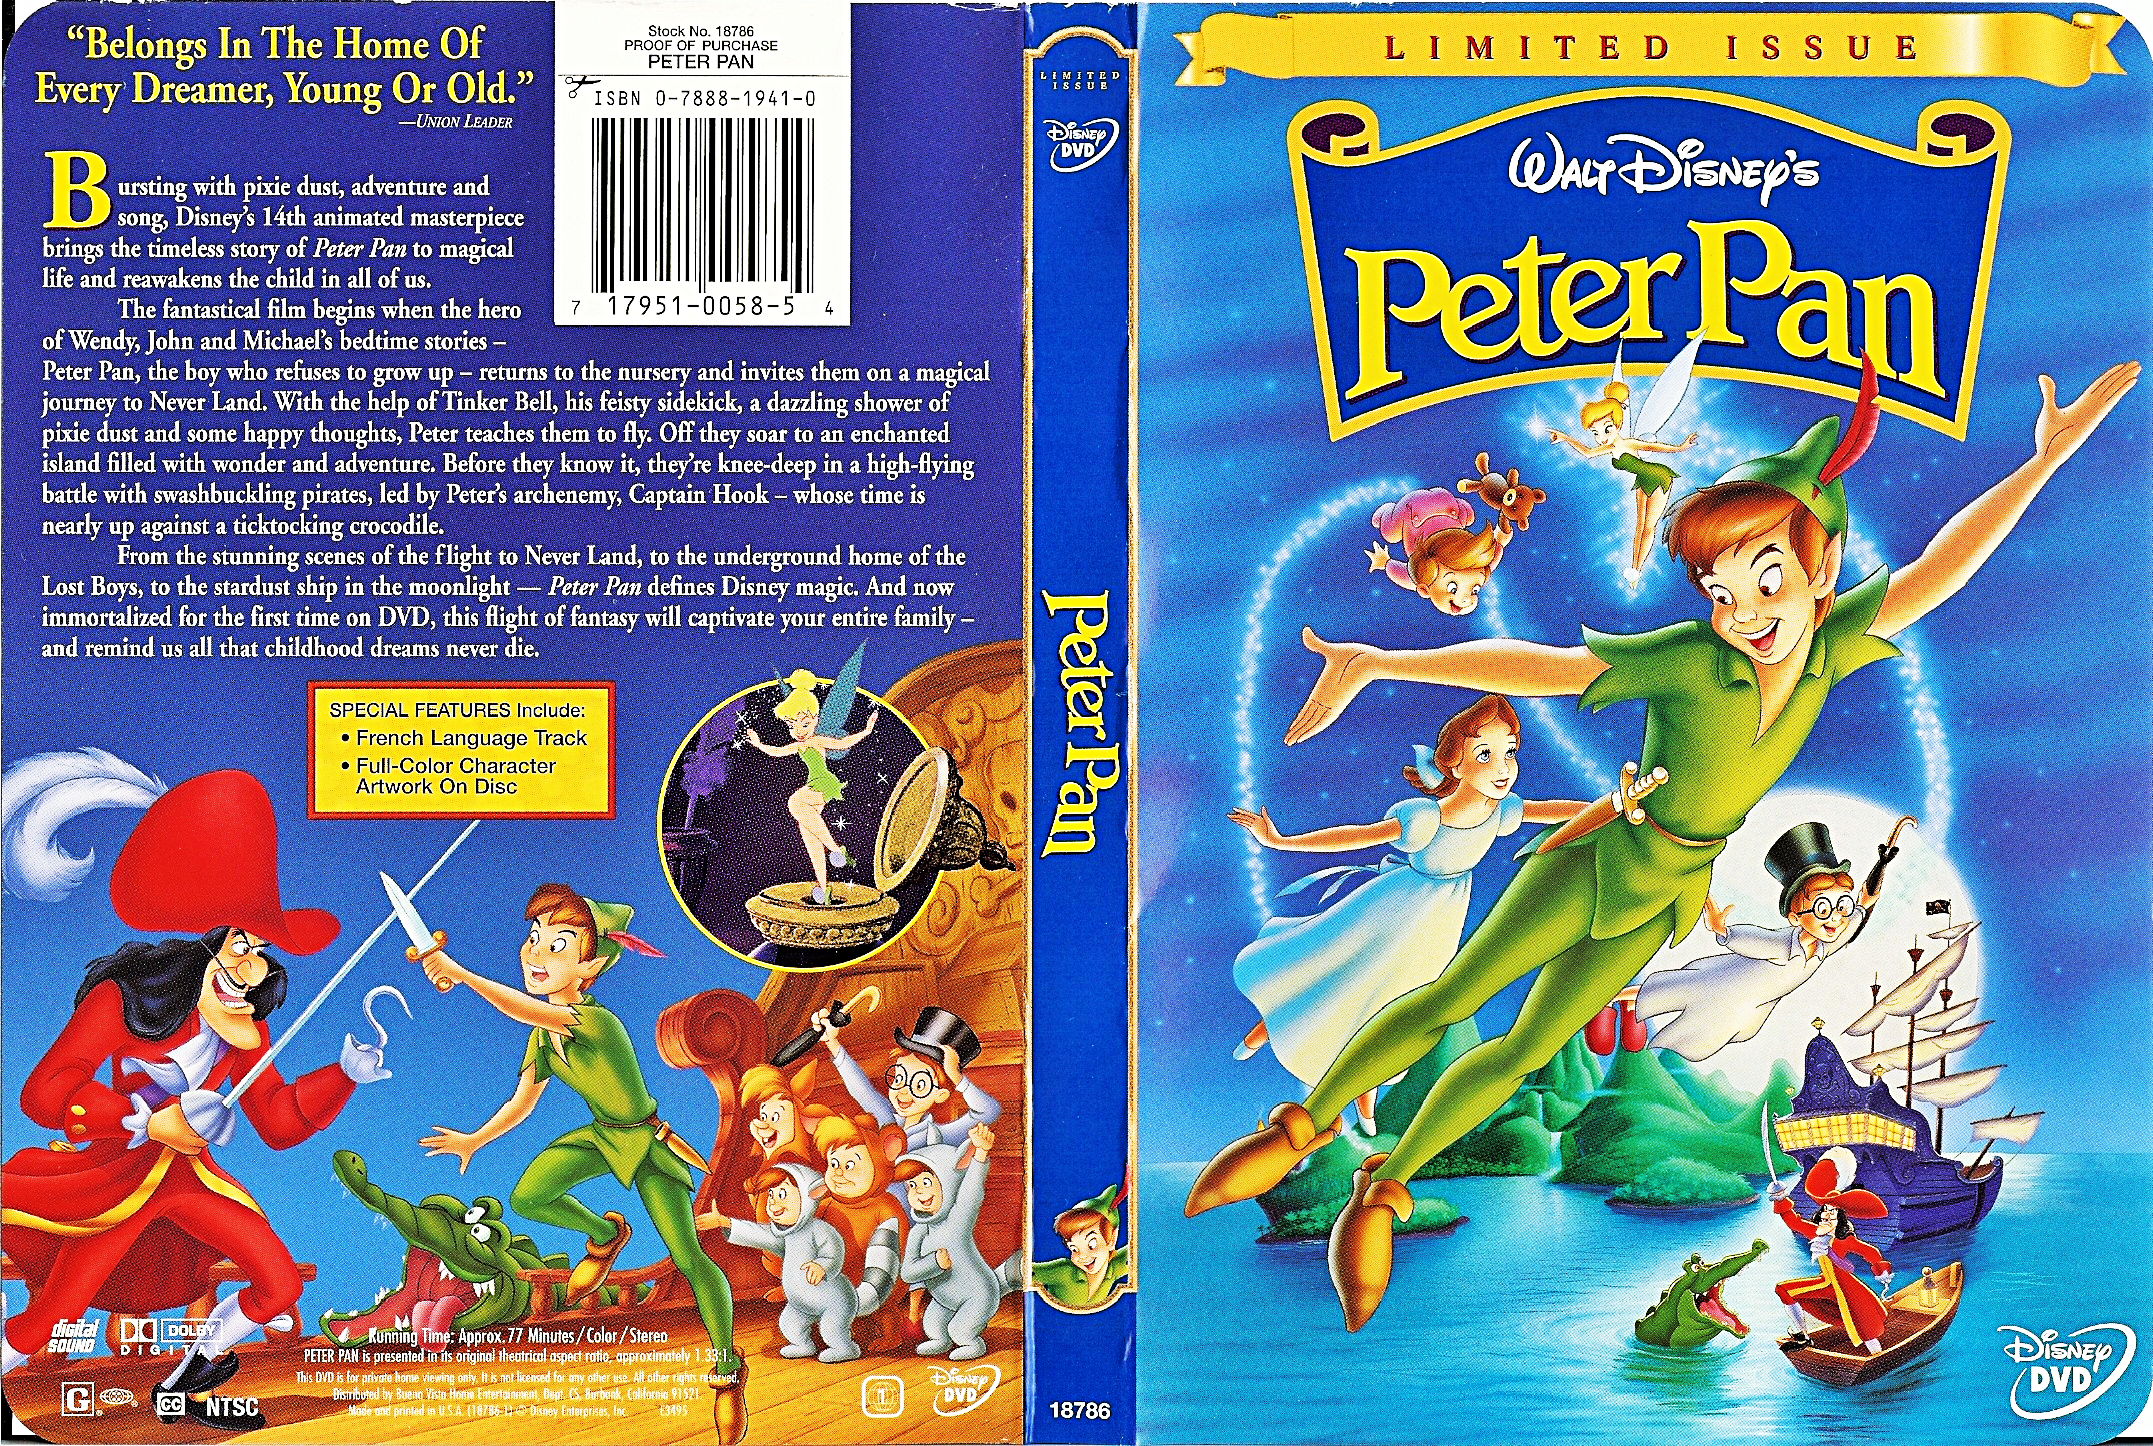 Walt Disney DVD Covers Pan: Limited Issue Disney Characters Photo